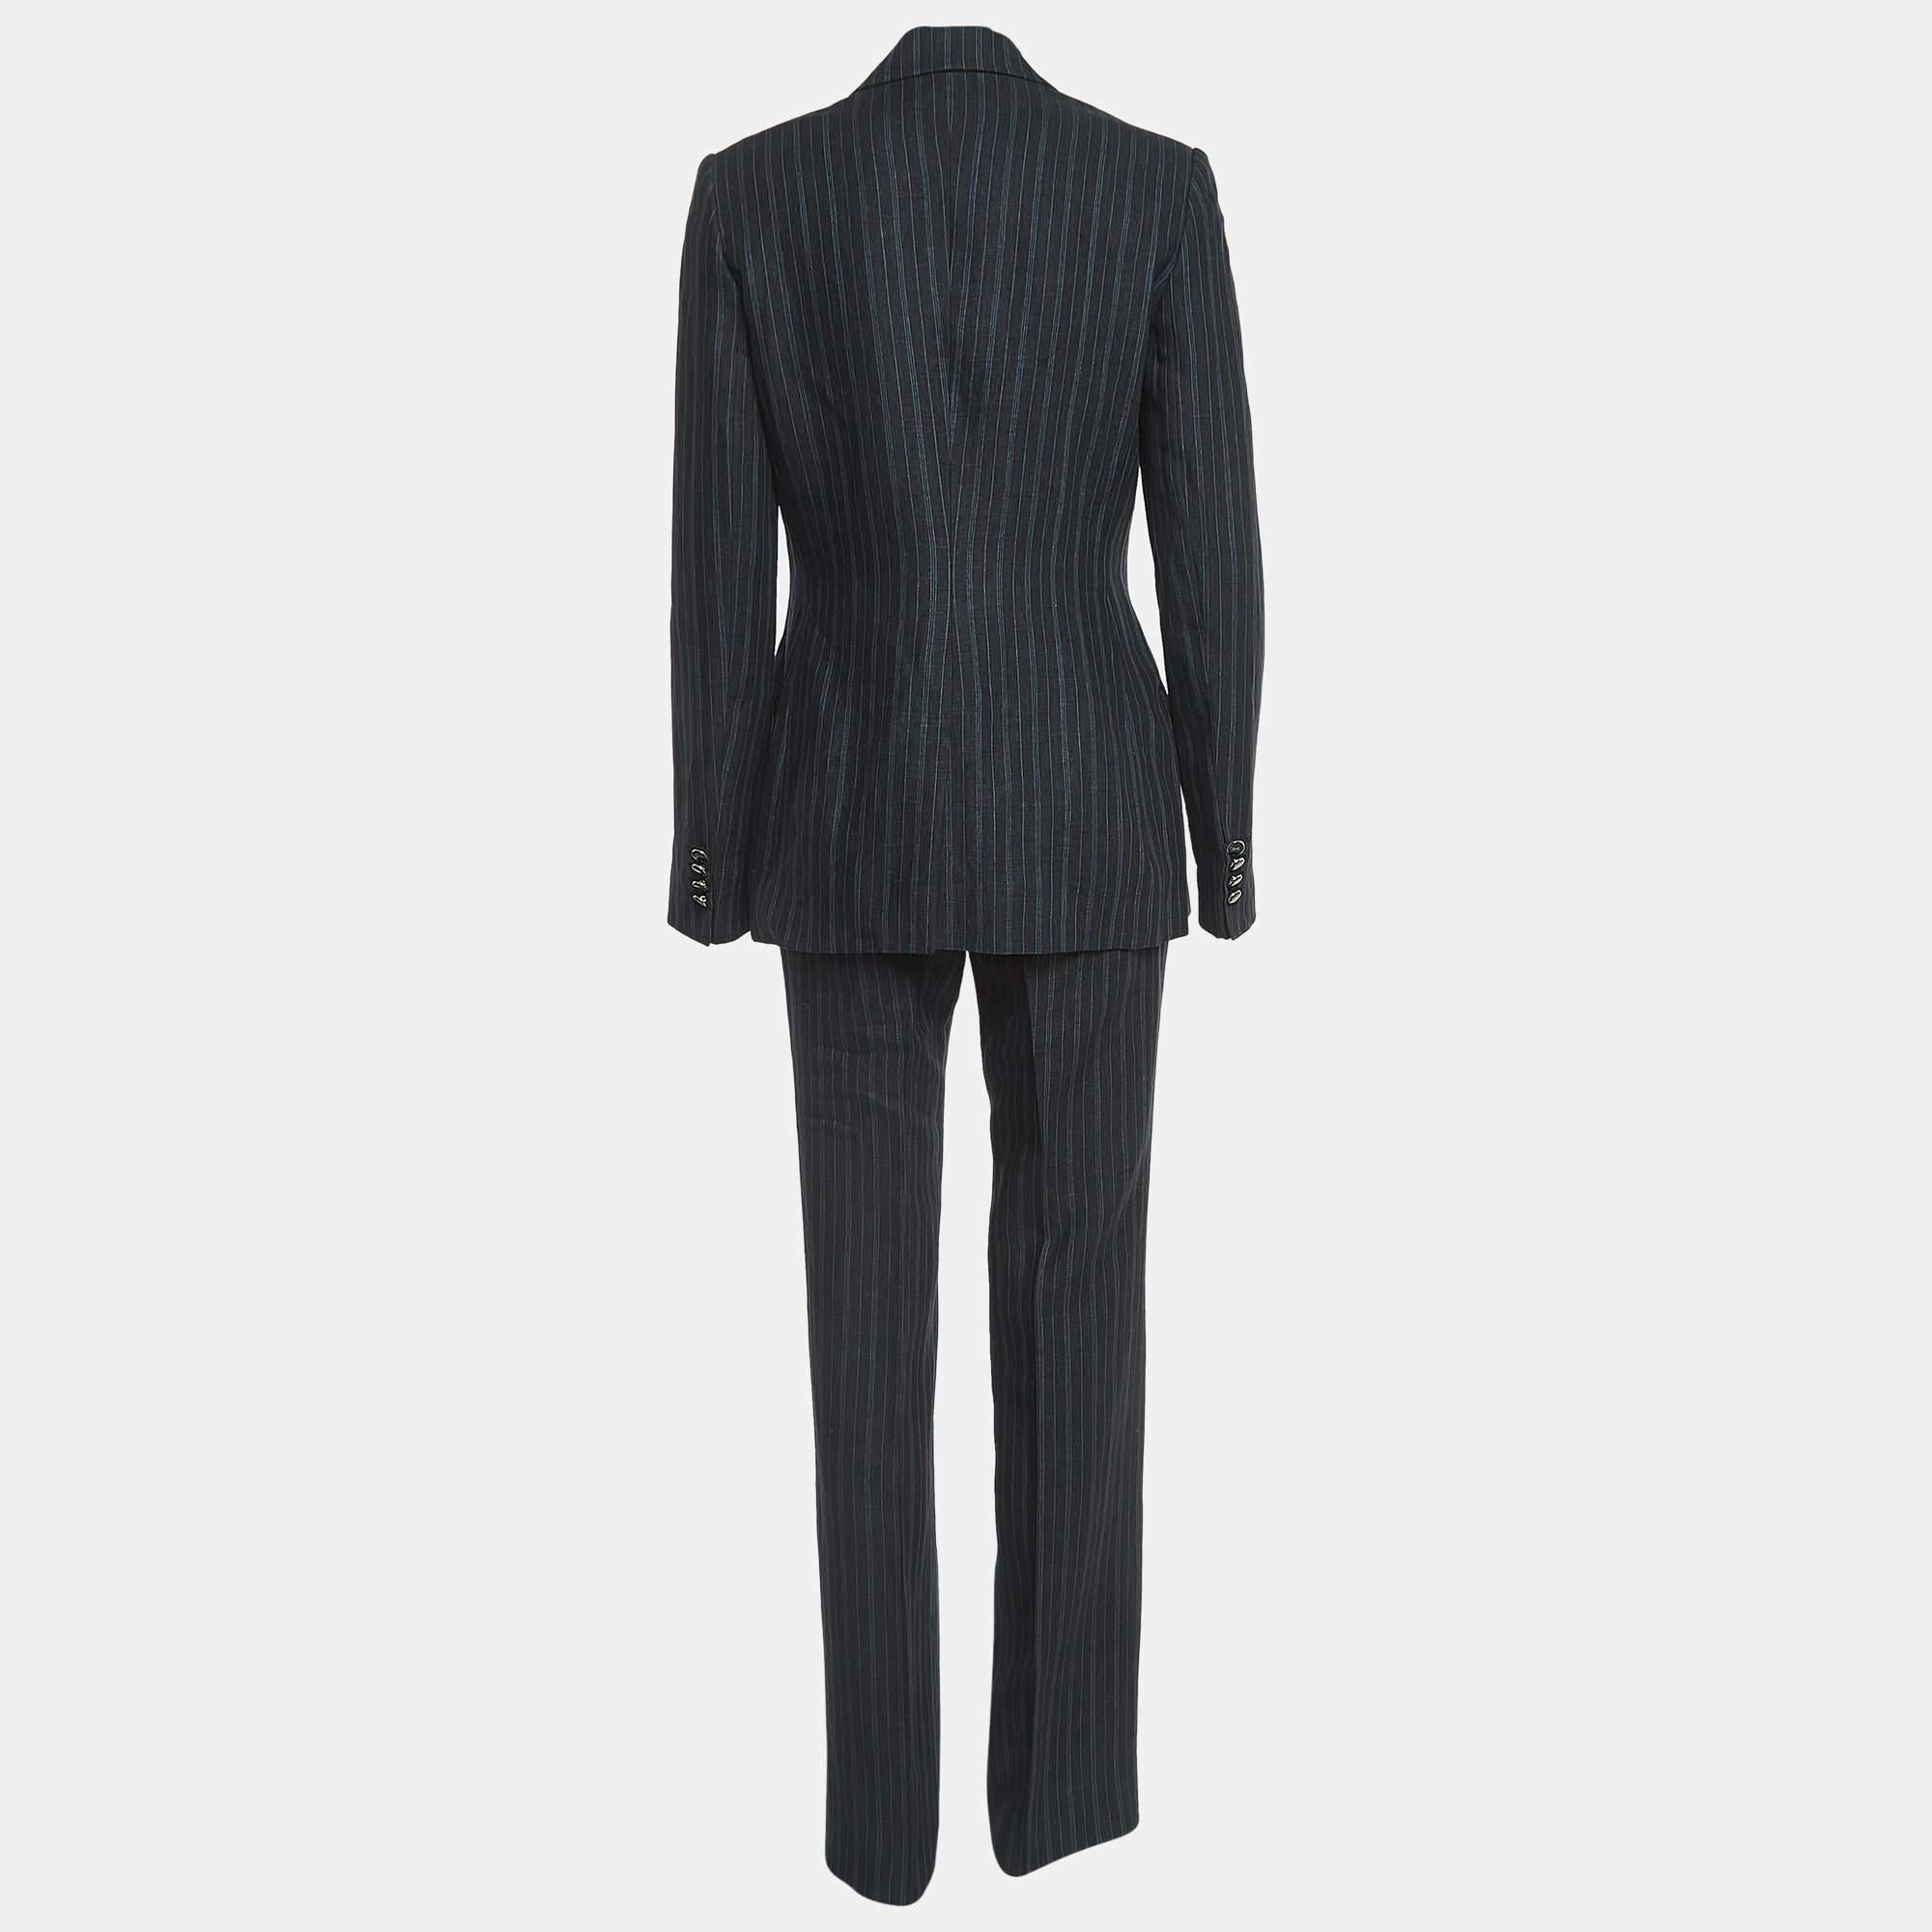 You're ready to nail any formal event and make a mark with this smart suit from Dolce & Gabbana. The black regular fit suit is made of quality materials and projects a smart appearance.

Includes: Brand tag
